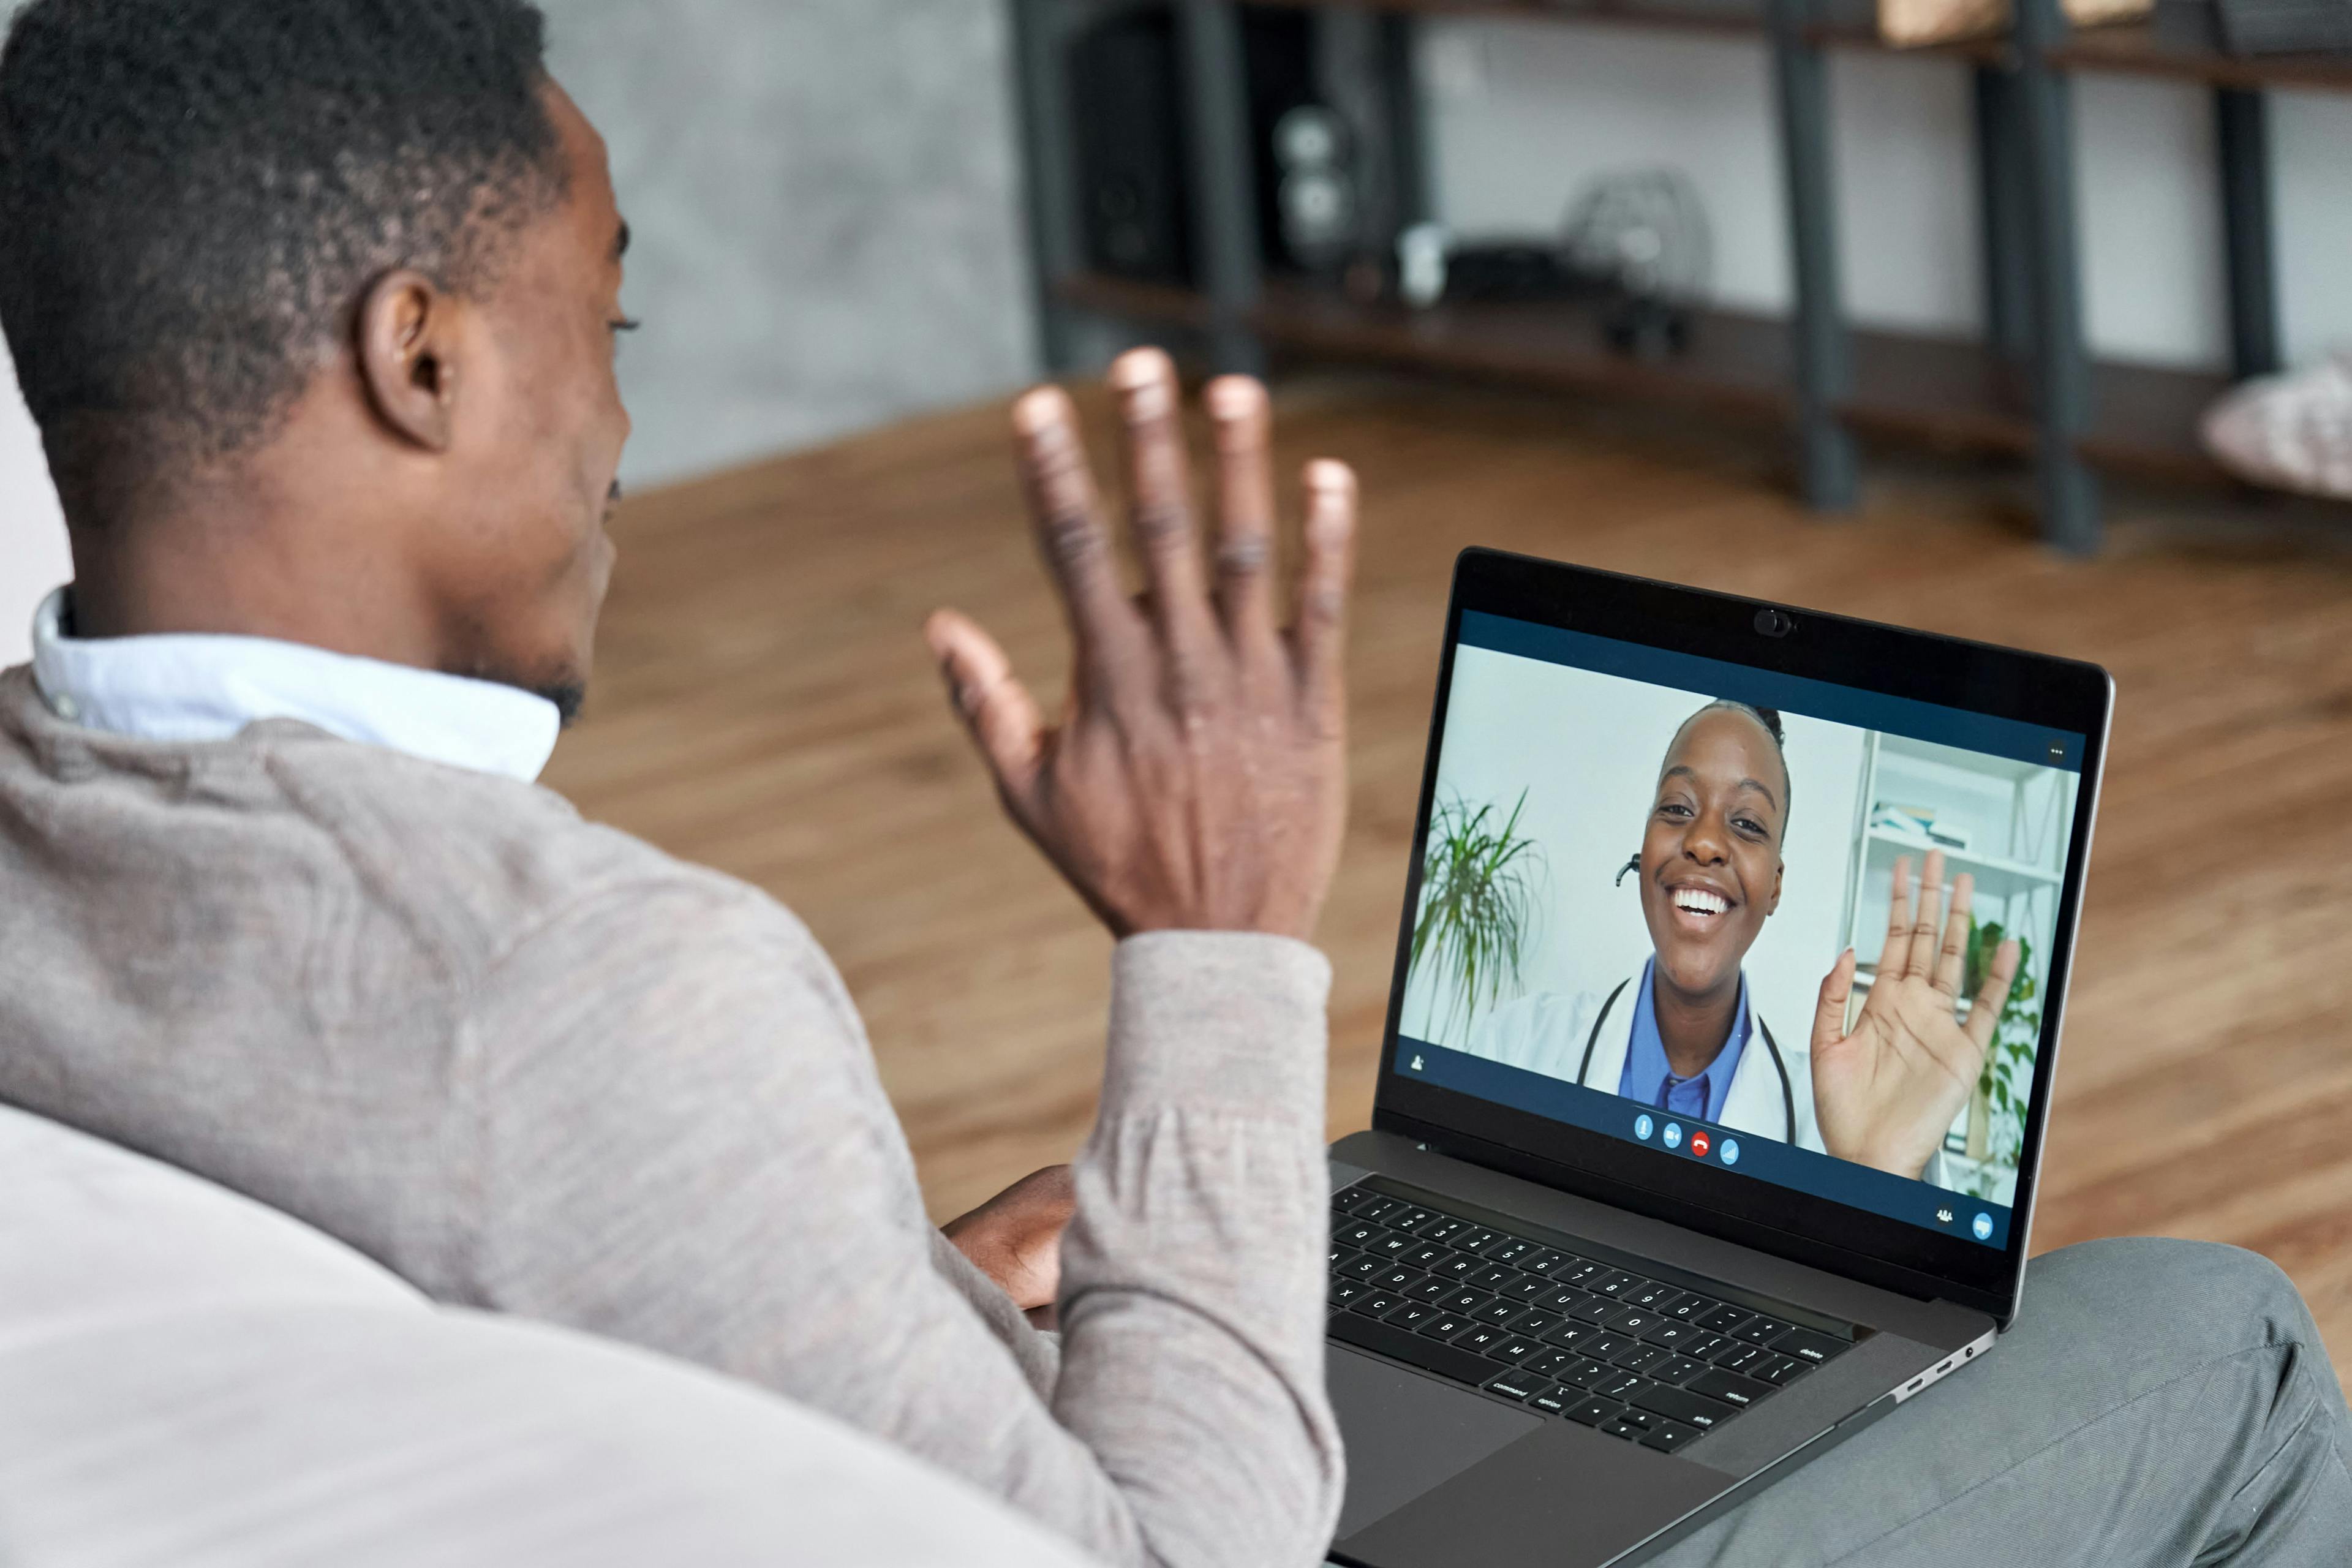 Male black patient talking on conference video call to female african doctor. Virtual therapist consulting young man during online appointment on laptop at home. Telemedicine chat, telehealth meeting | Image Credit: insta_photos - stock.adobe.com